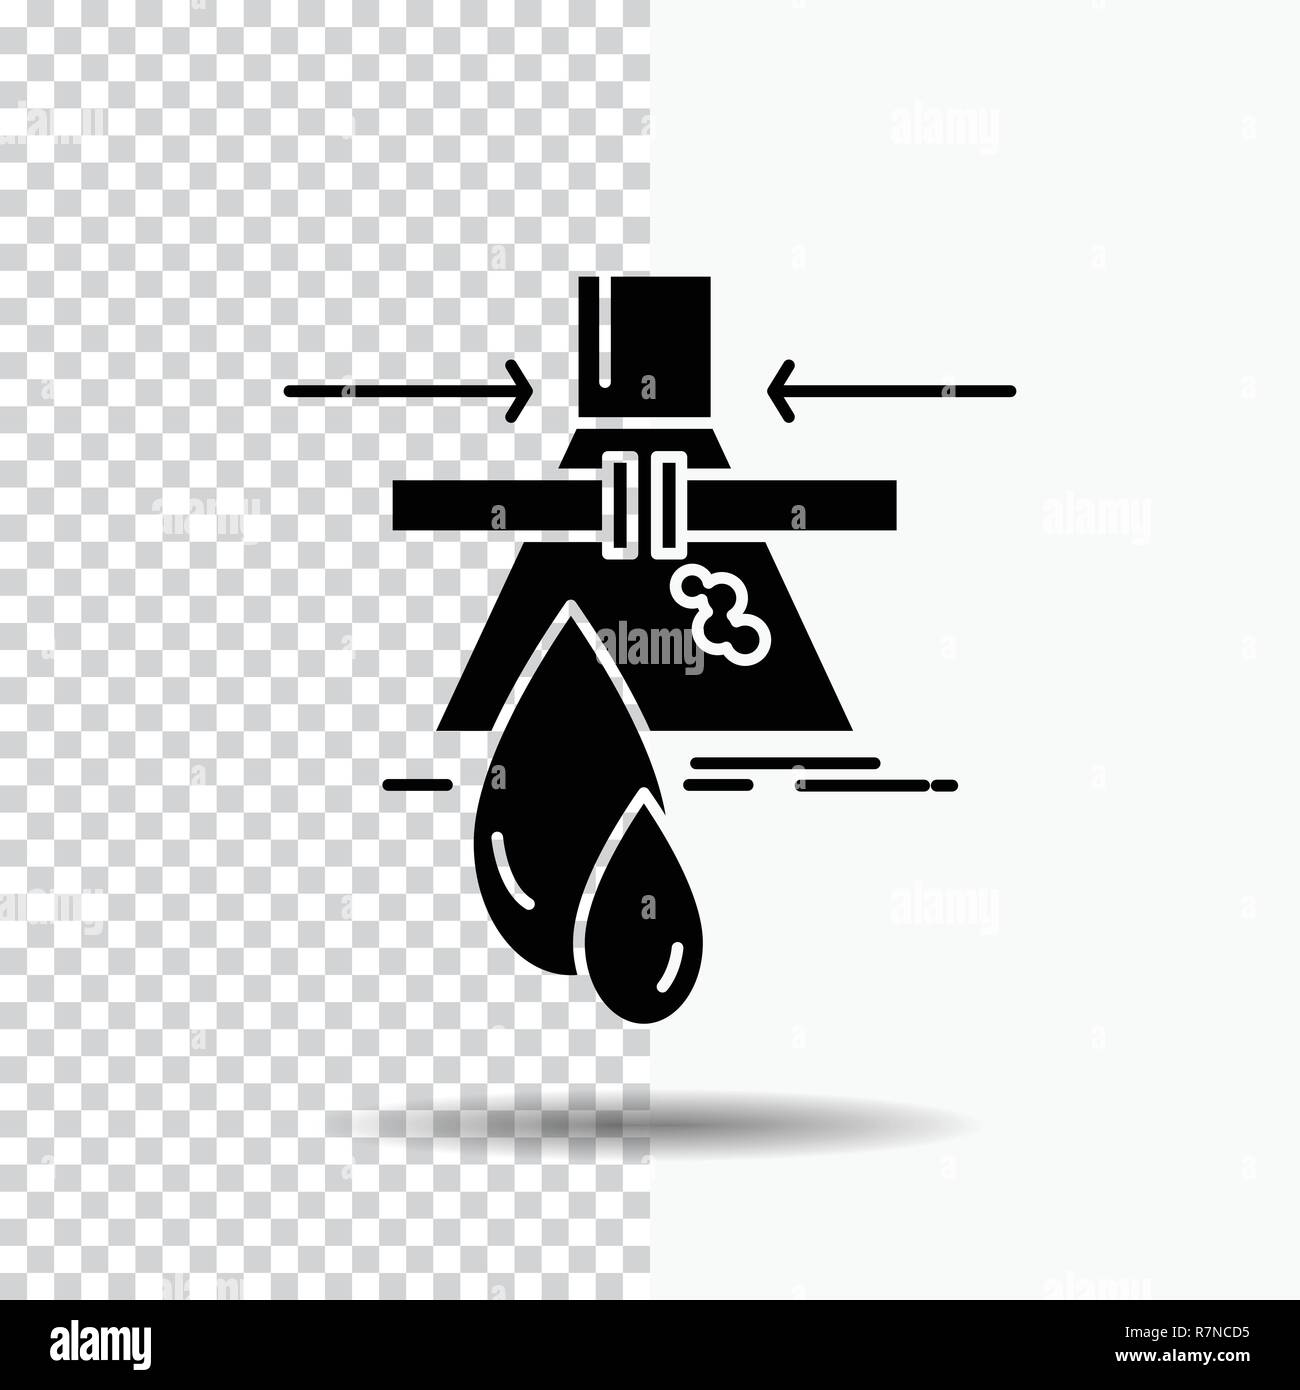 Chemical, Leak, Detection, Factory, pollution Glyph Icon on Transparent Background. Black Icon Stock Vector